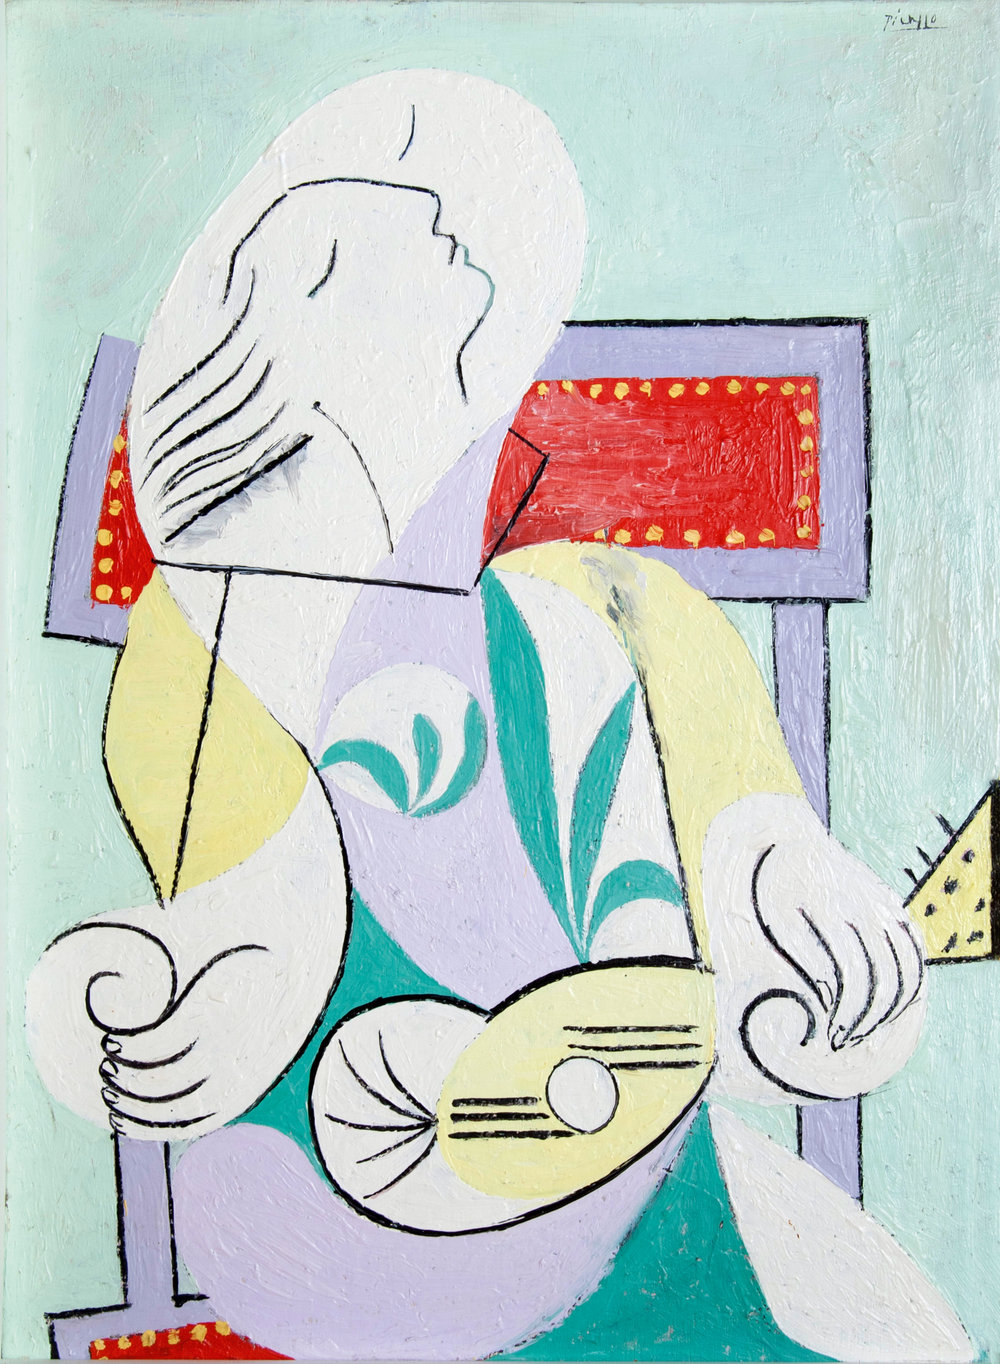 Young Woman with a Mandolin